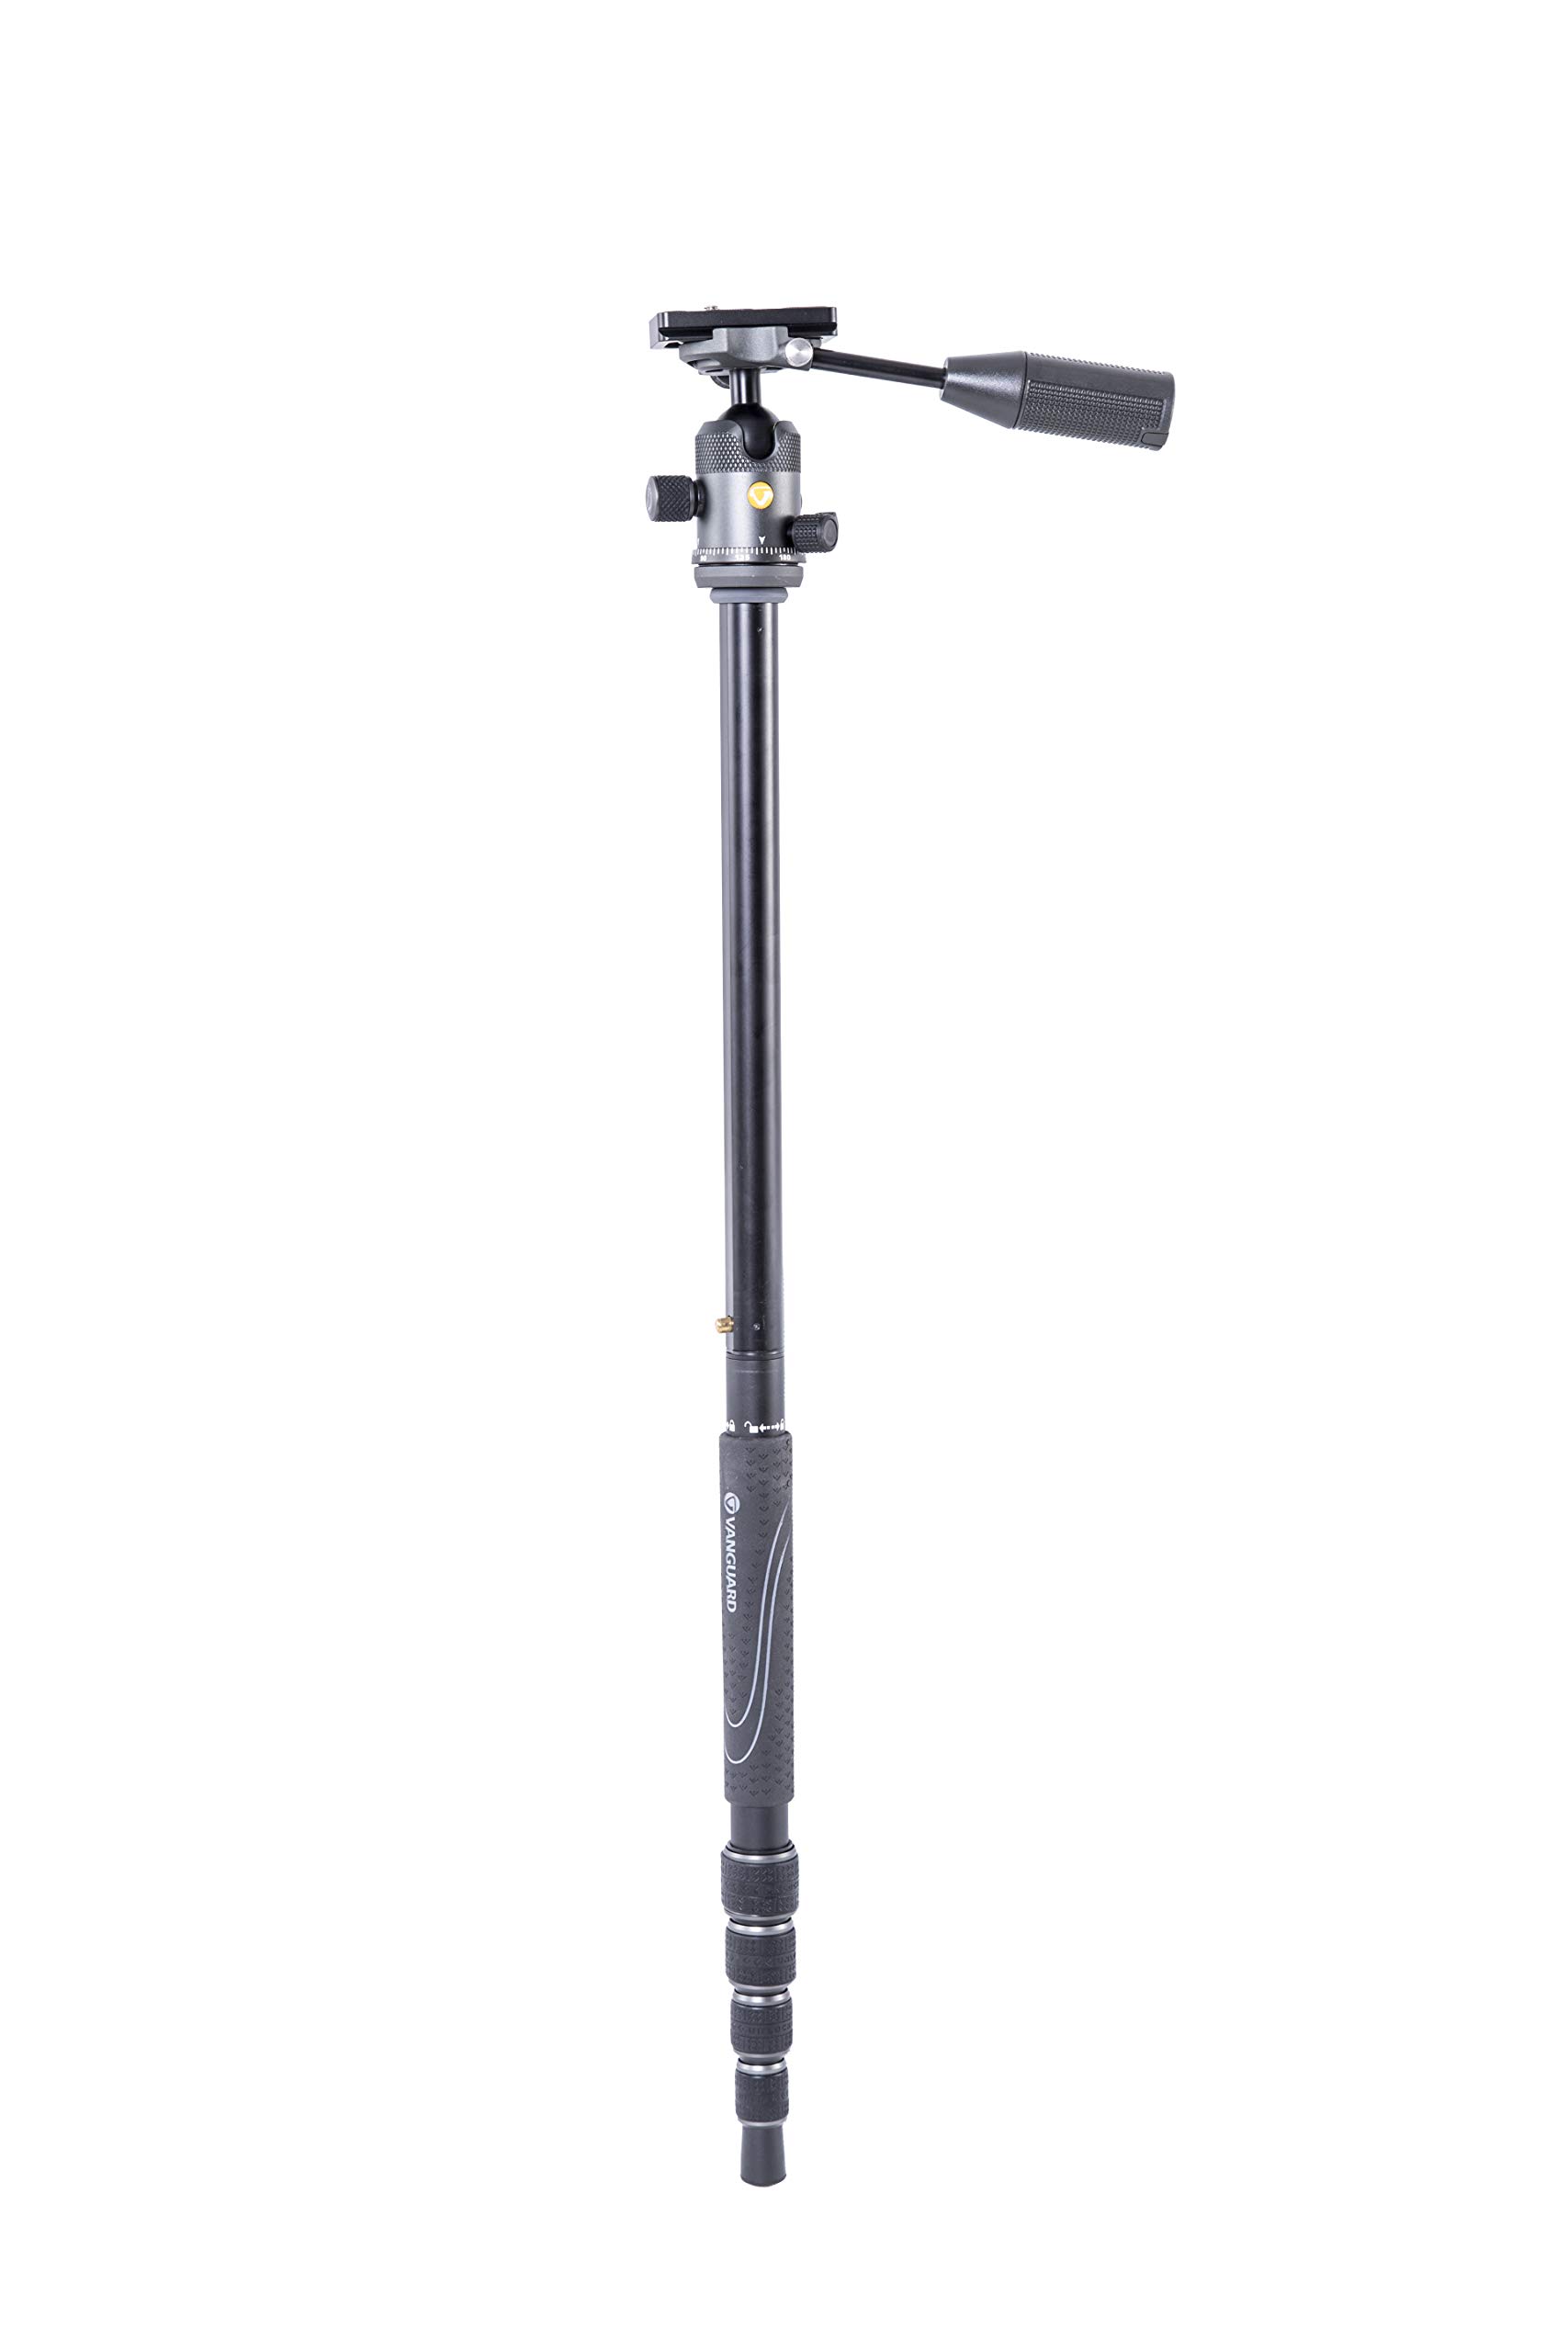 Vanguard VEO 2X 235ABP 4 in 1 Travel Tripod, Monopod, Ball Head with Removeable Pan Handle - 23 mm, Aluminum